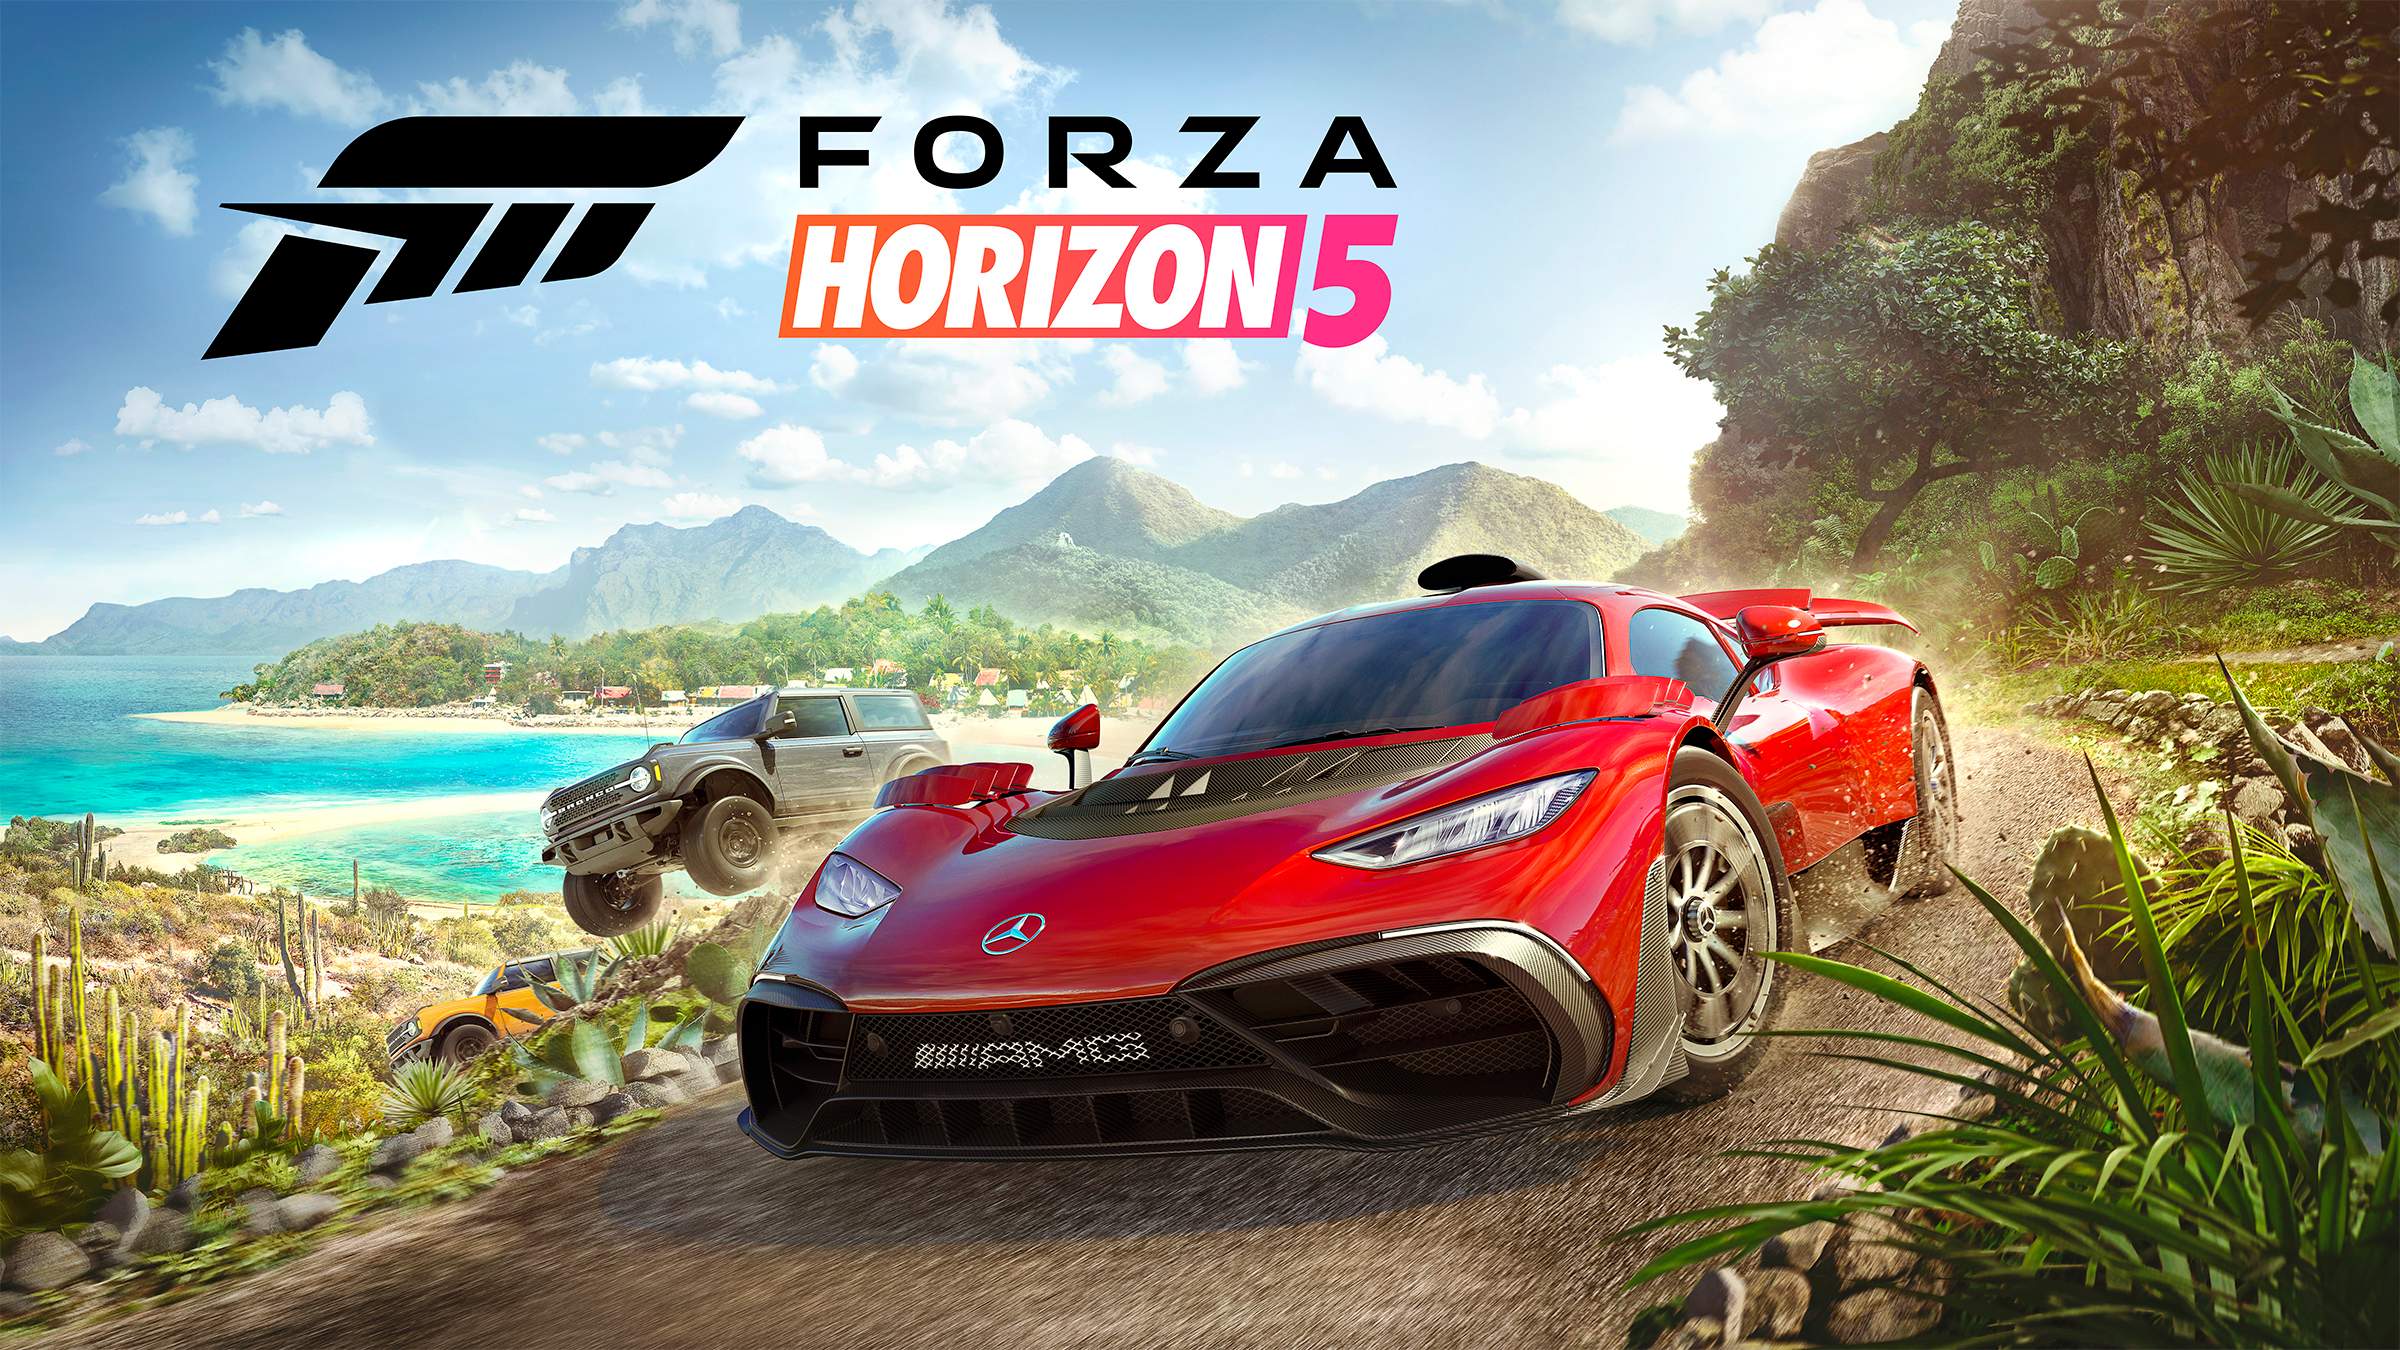 Forza Horizon 5 Shows Off Its Cover Cars And Driving Gameplay at